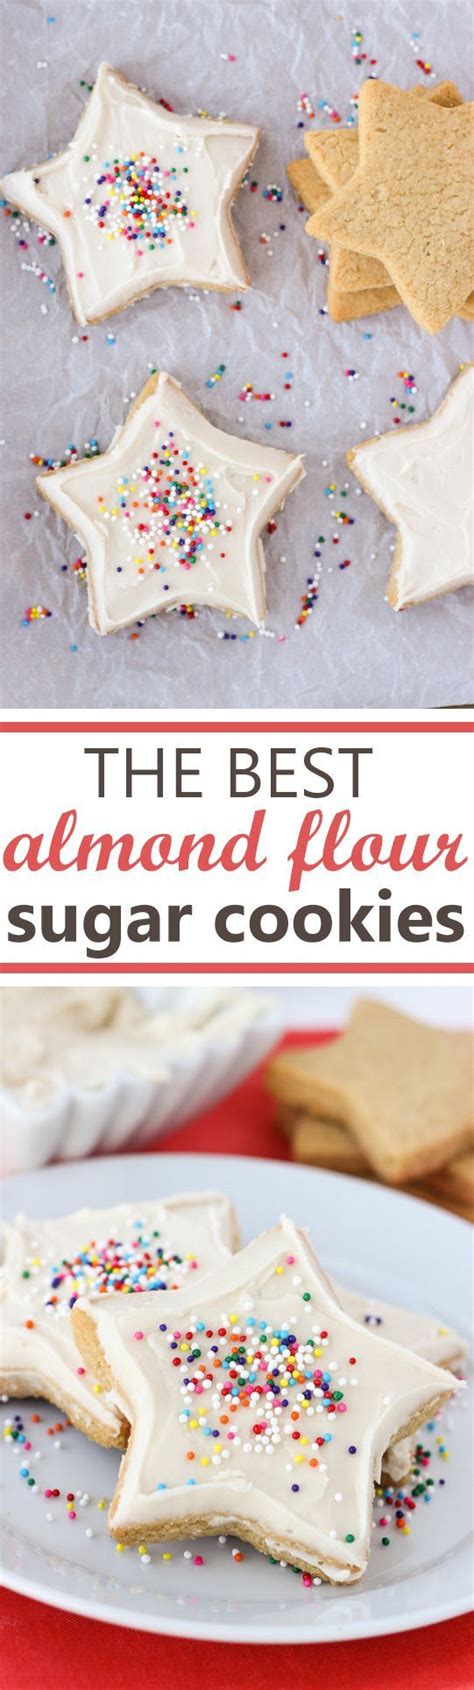 Other names for almond flour are powdered almonds and almond powder. The Best Almond Flour Sugar Cookies (Gluten-Free, Grain-Free) | Recipe | Gluten free christmas ...